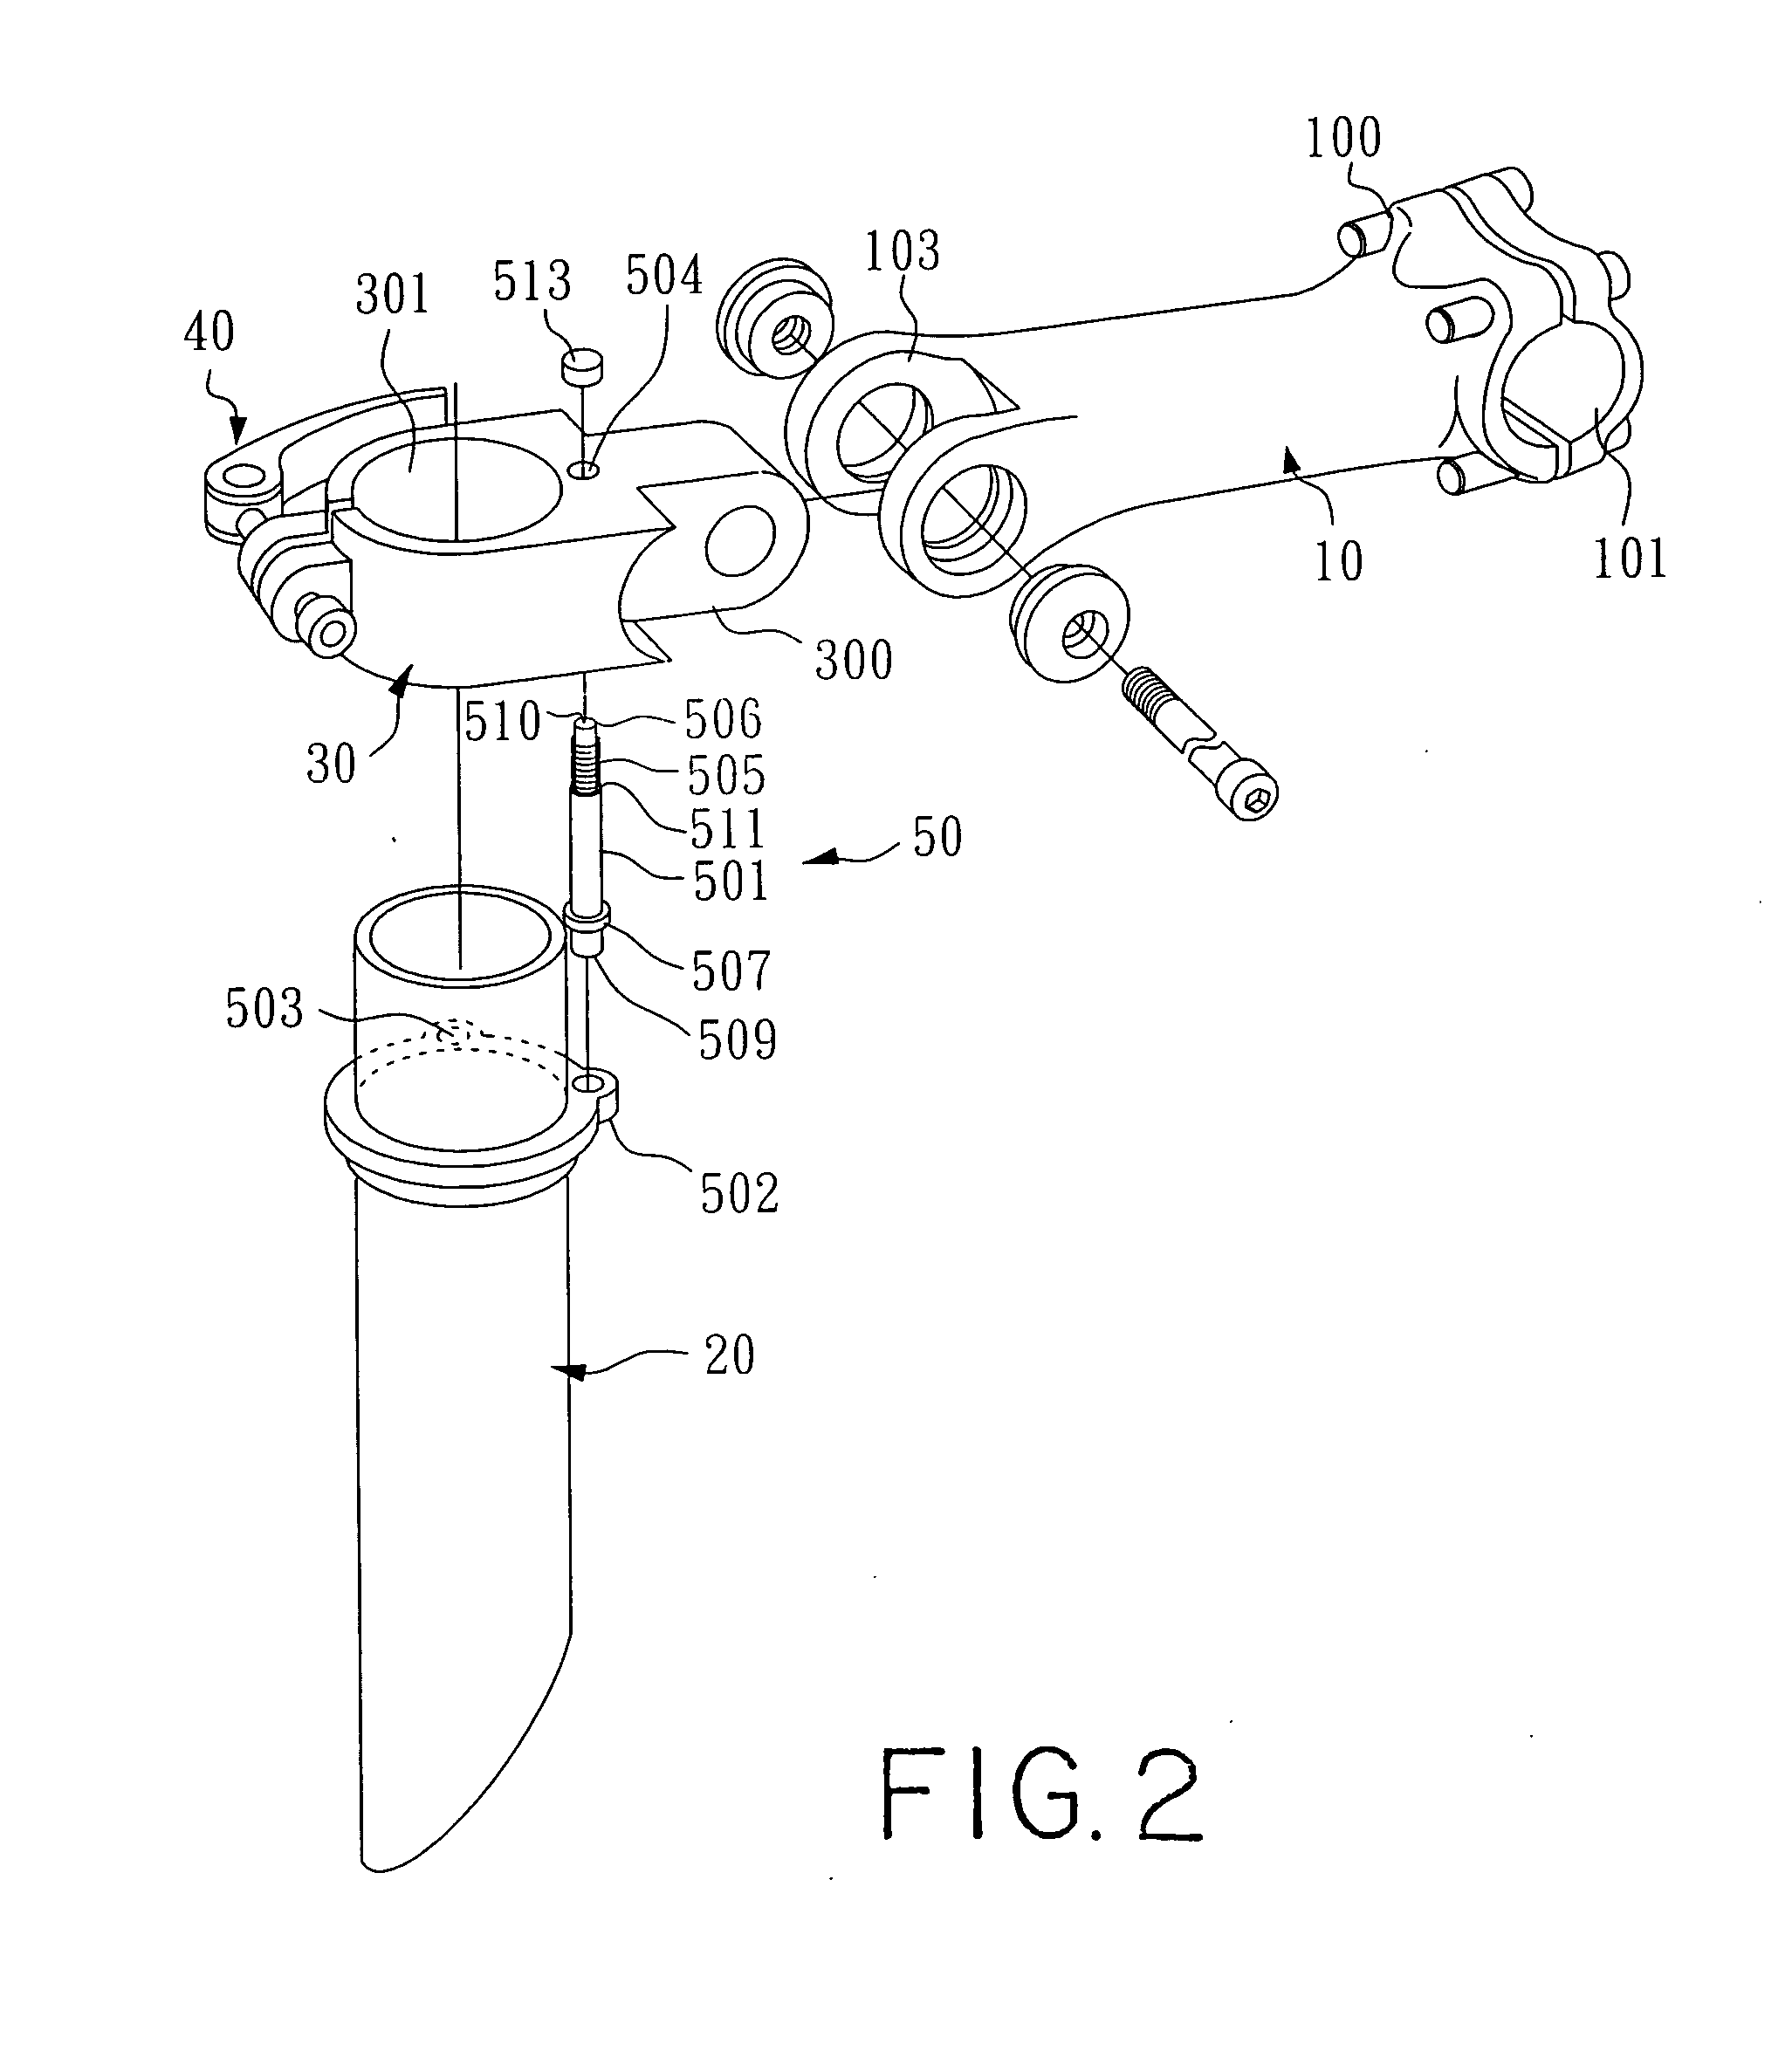 Bicycle stem having a positioning mechanism for re-positioning a handle